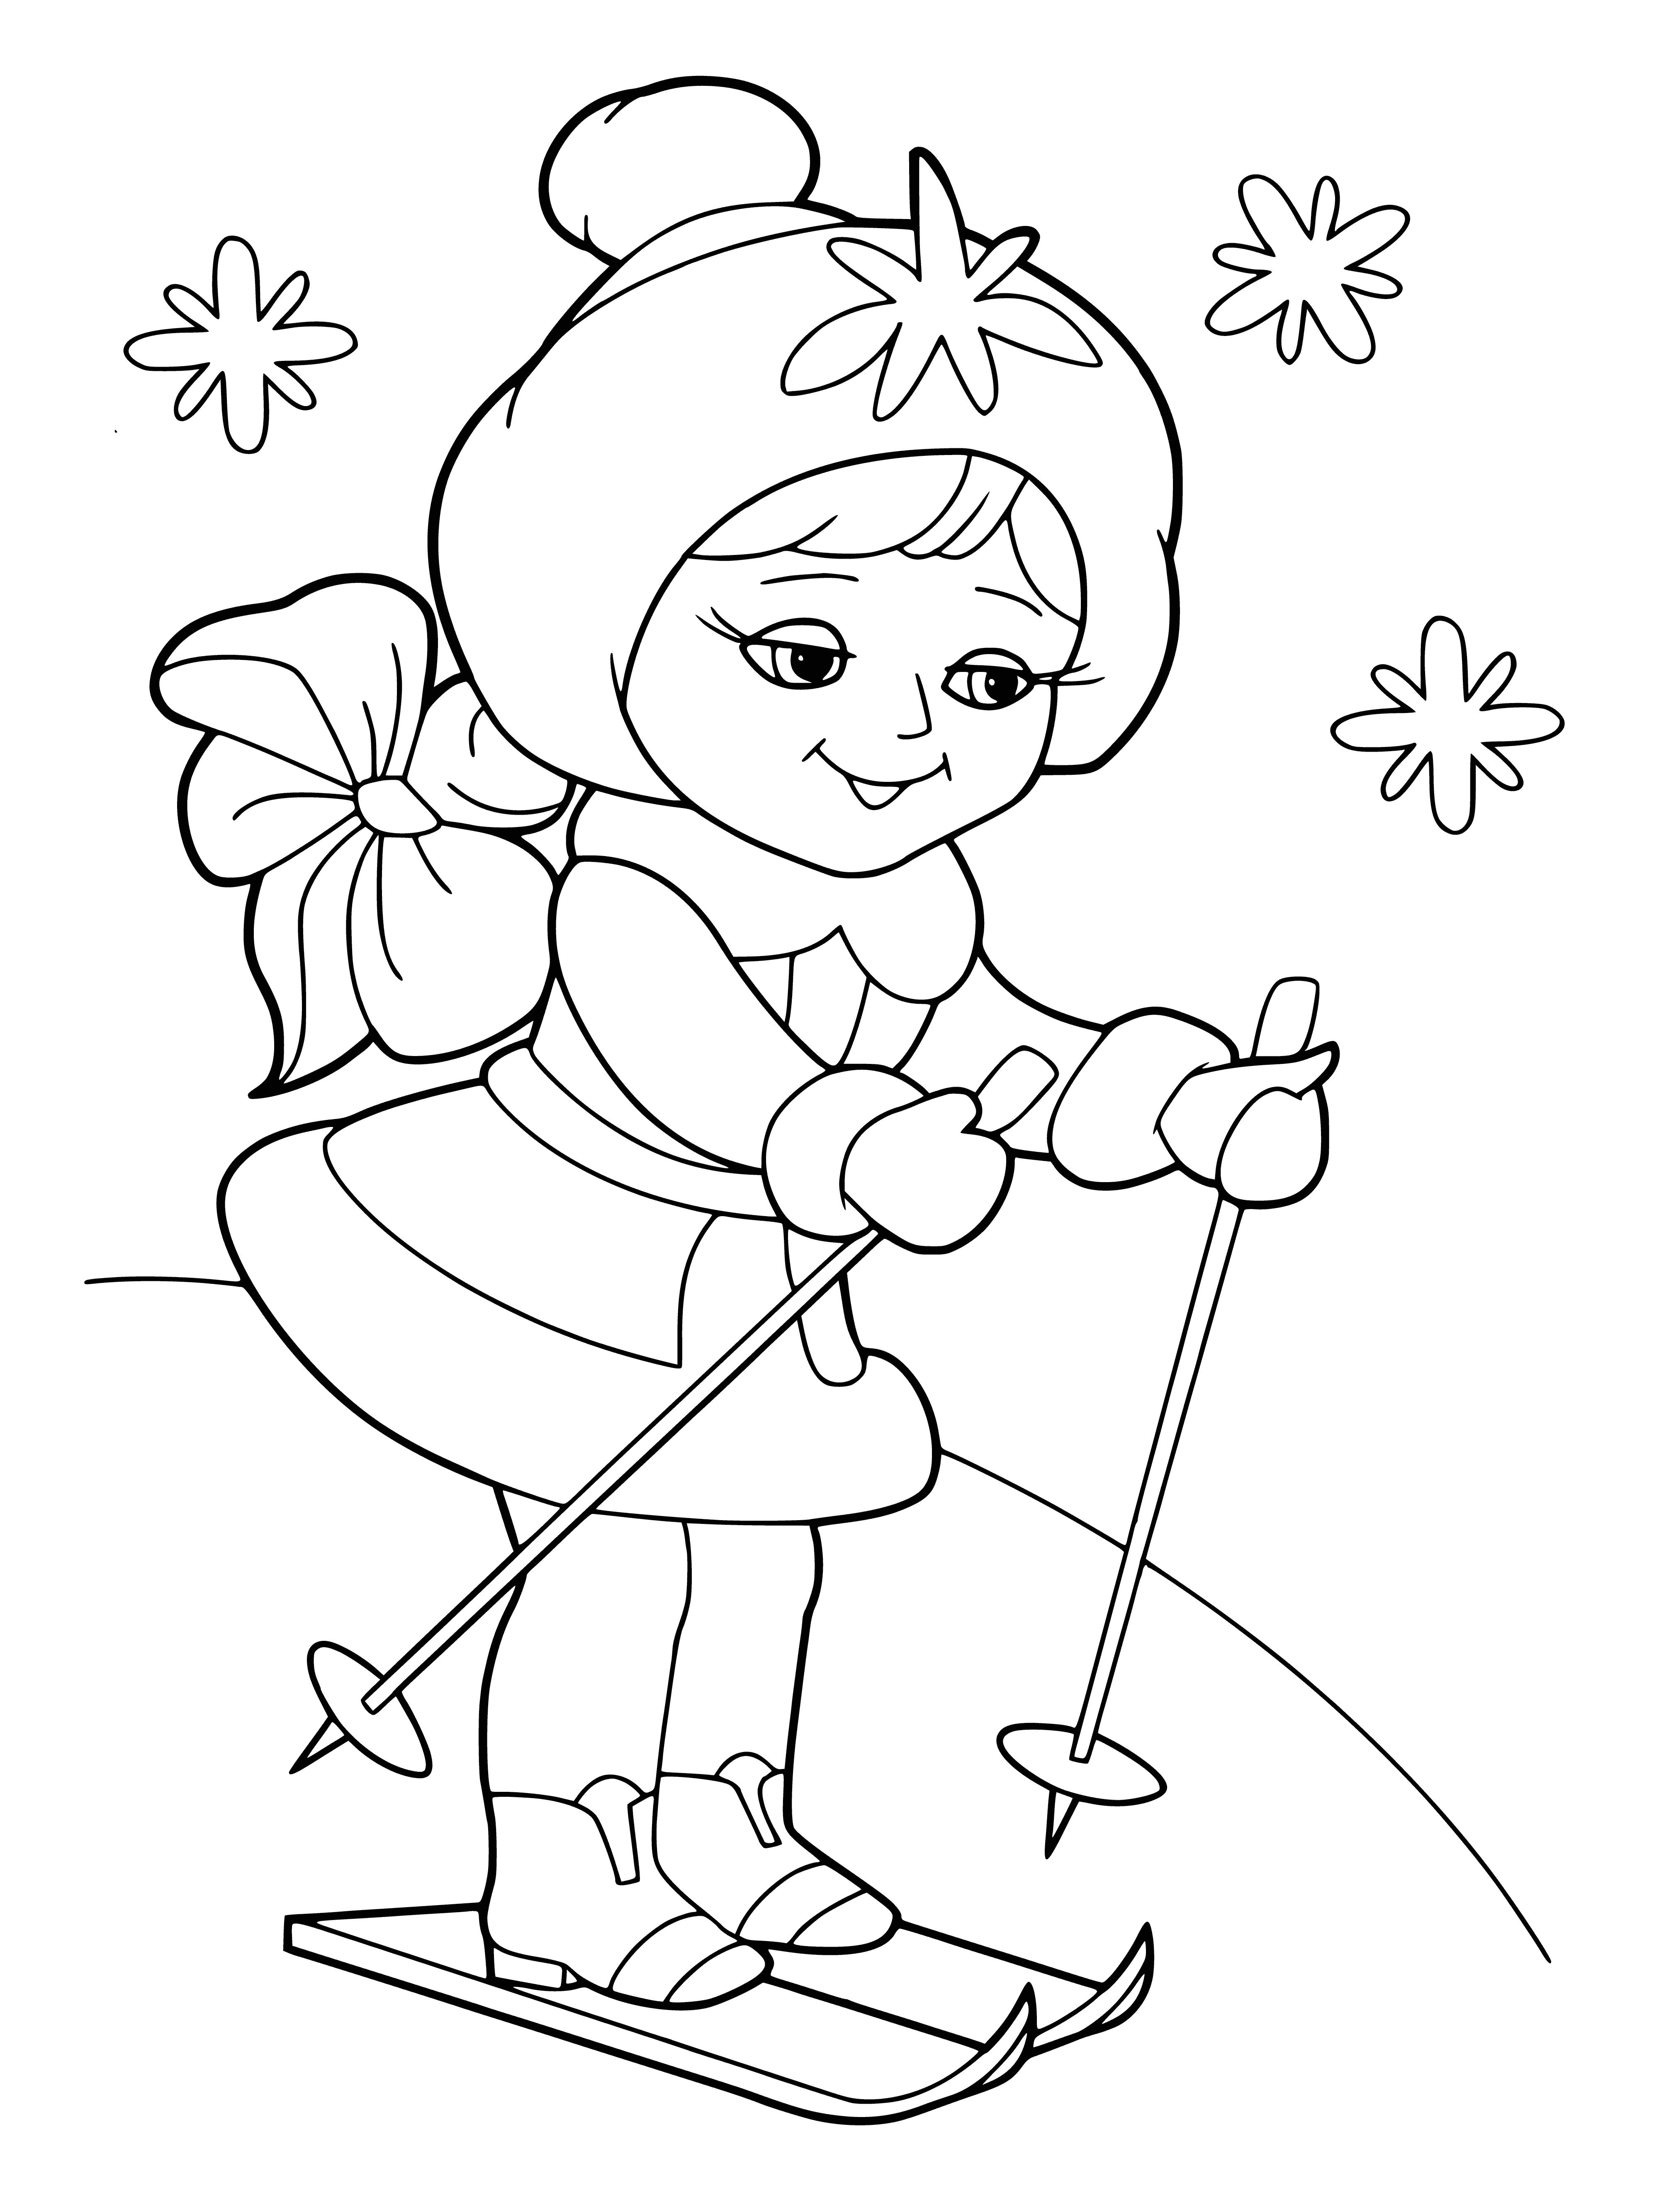 Girl in winter gear stands on skis holding poles with blue scarf, jacket, headband & snowflake-decorated white dress.